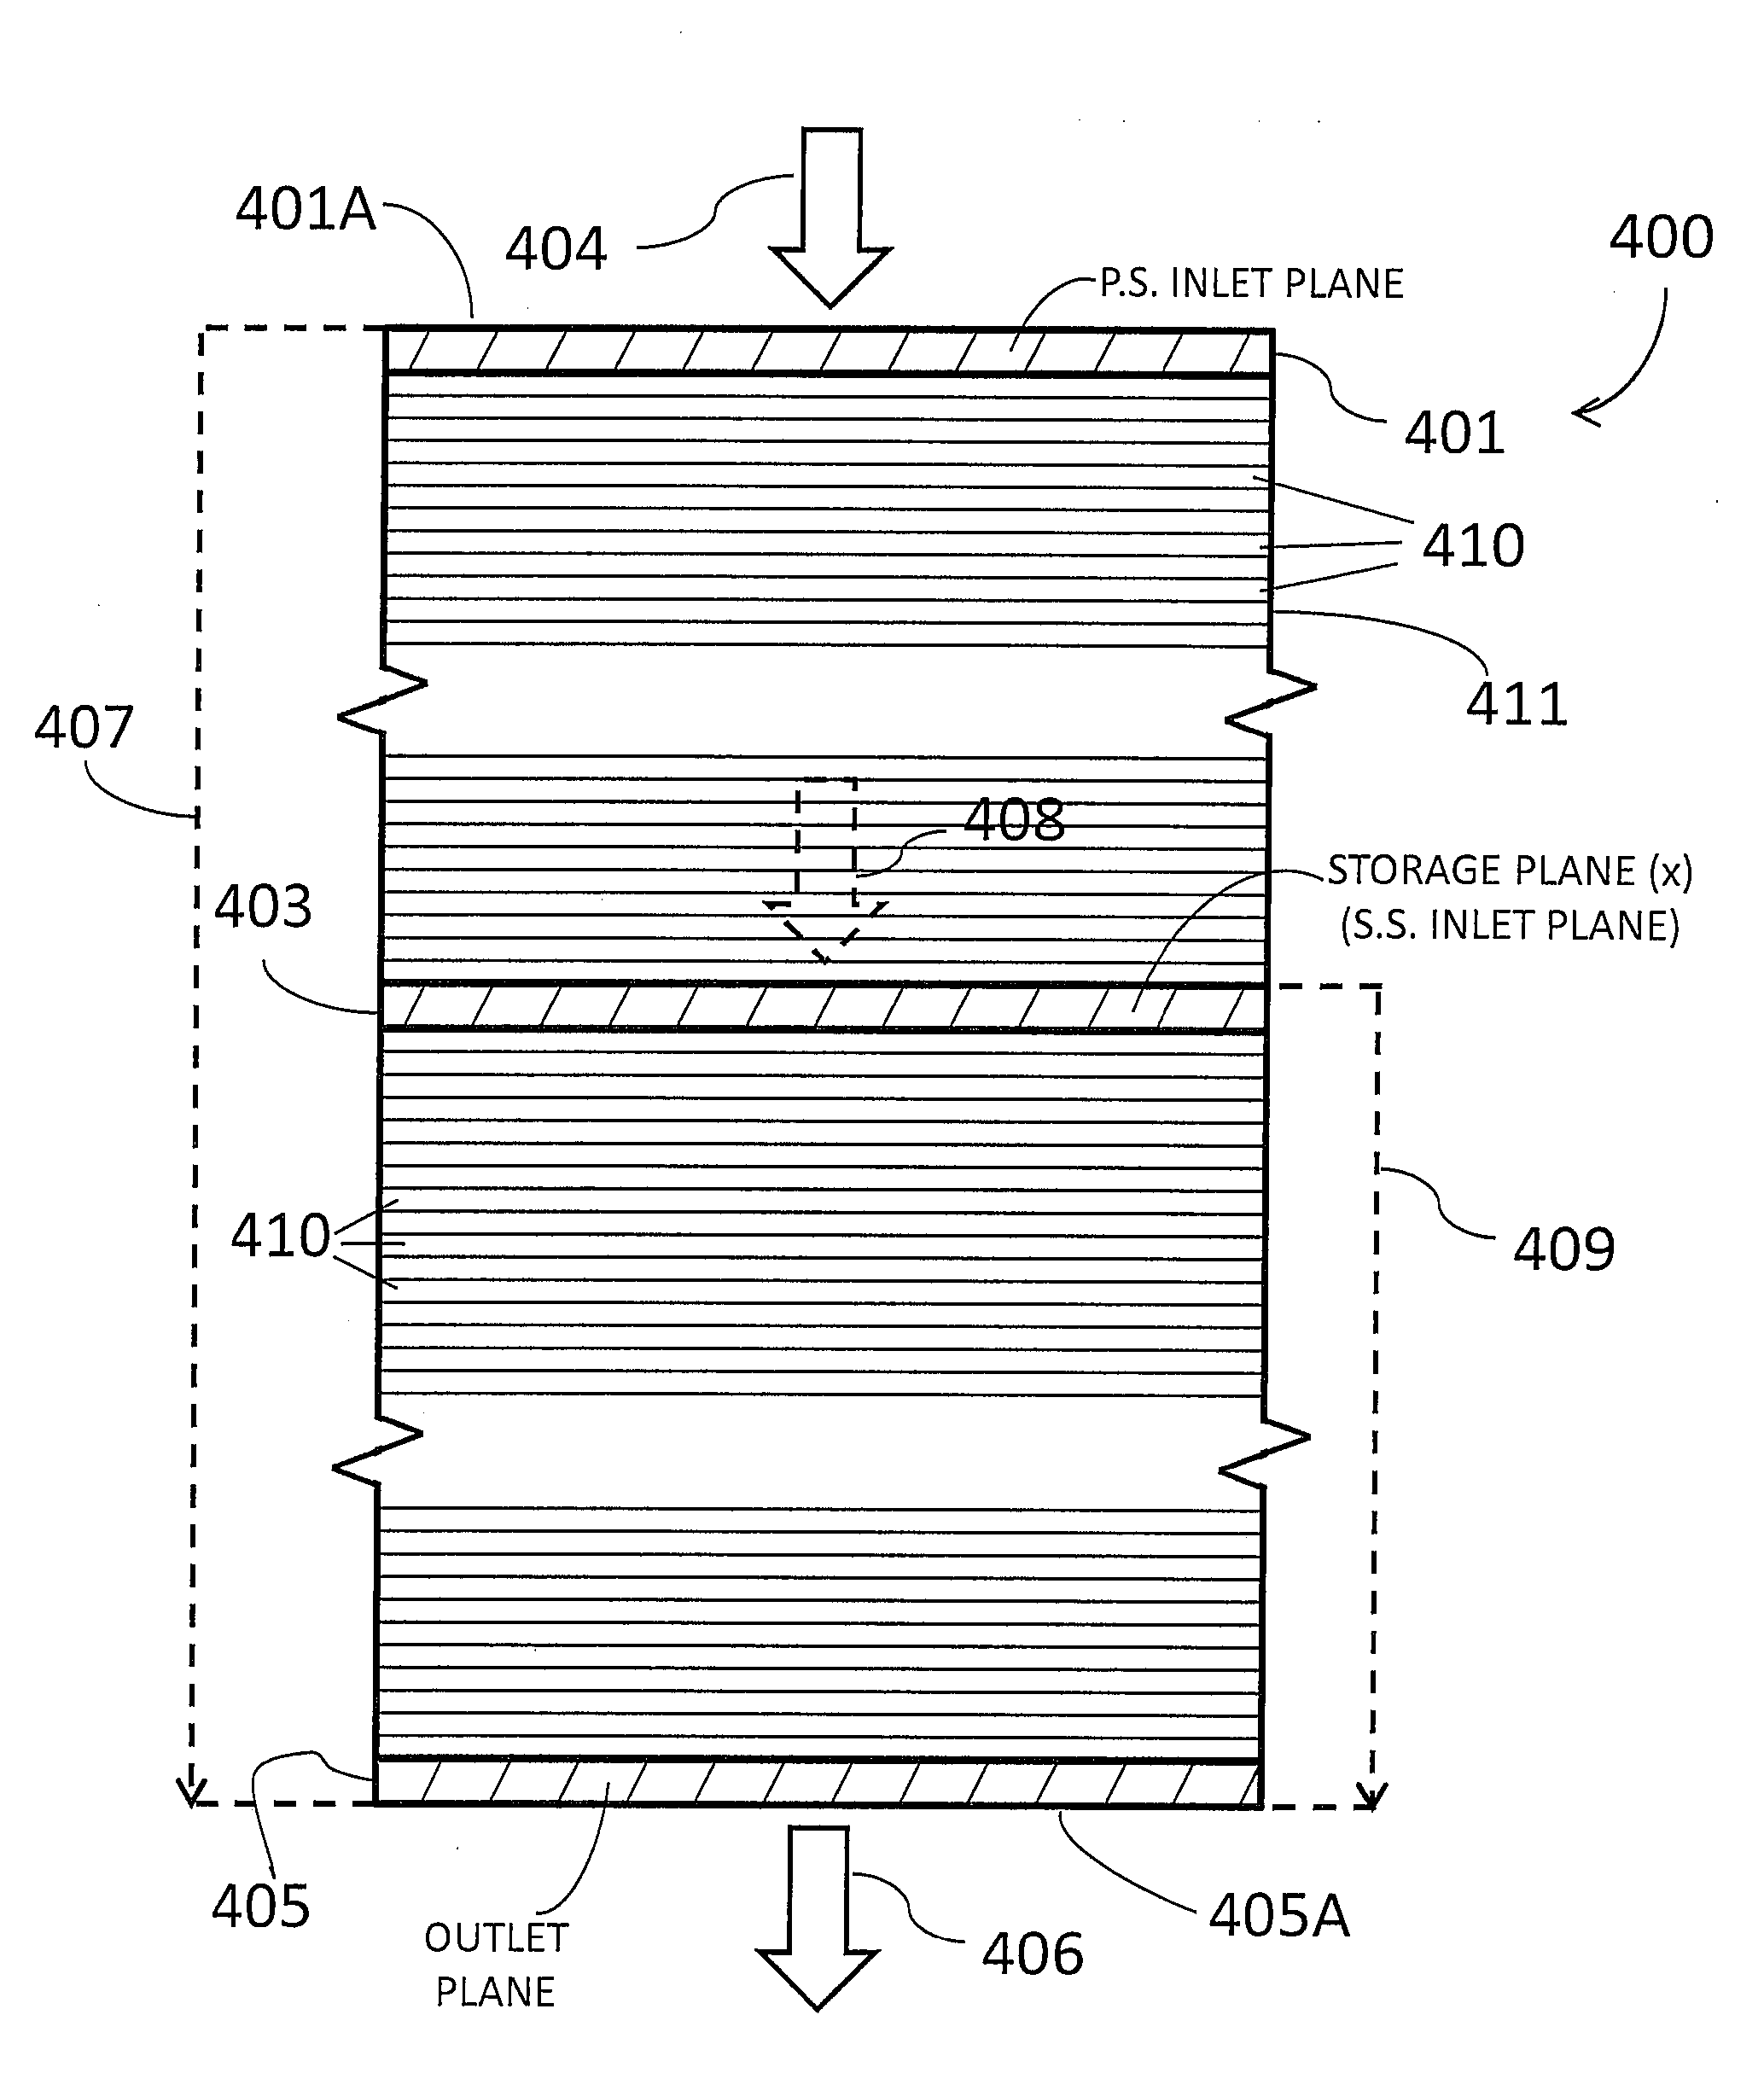 Method For Evaluating Relative Permeability For Fractional Multi-Phase, Multi-Component Fluid Flow Through Porous Media